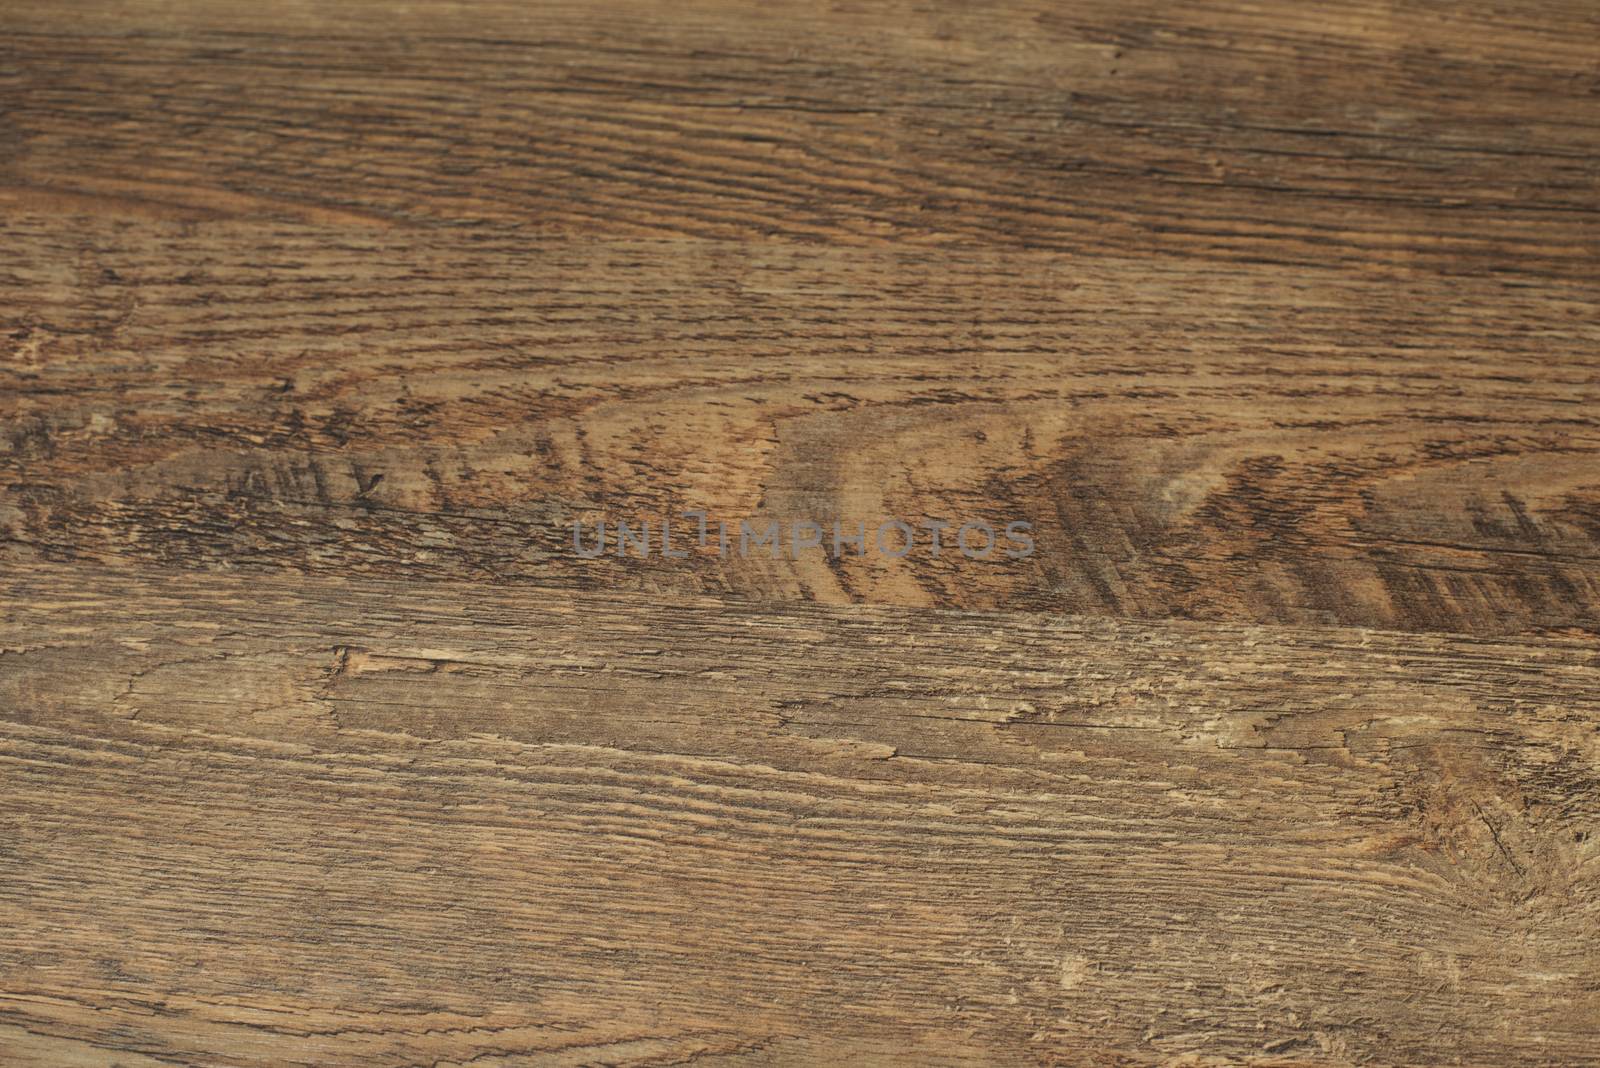 Wood background. Old wood texture. Wooden plank grain background. Striped timber desk close up, old table or floor. Brown boards by sevda_stancheva